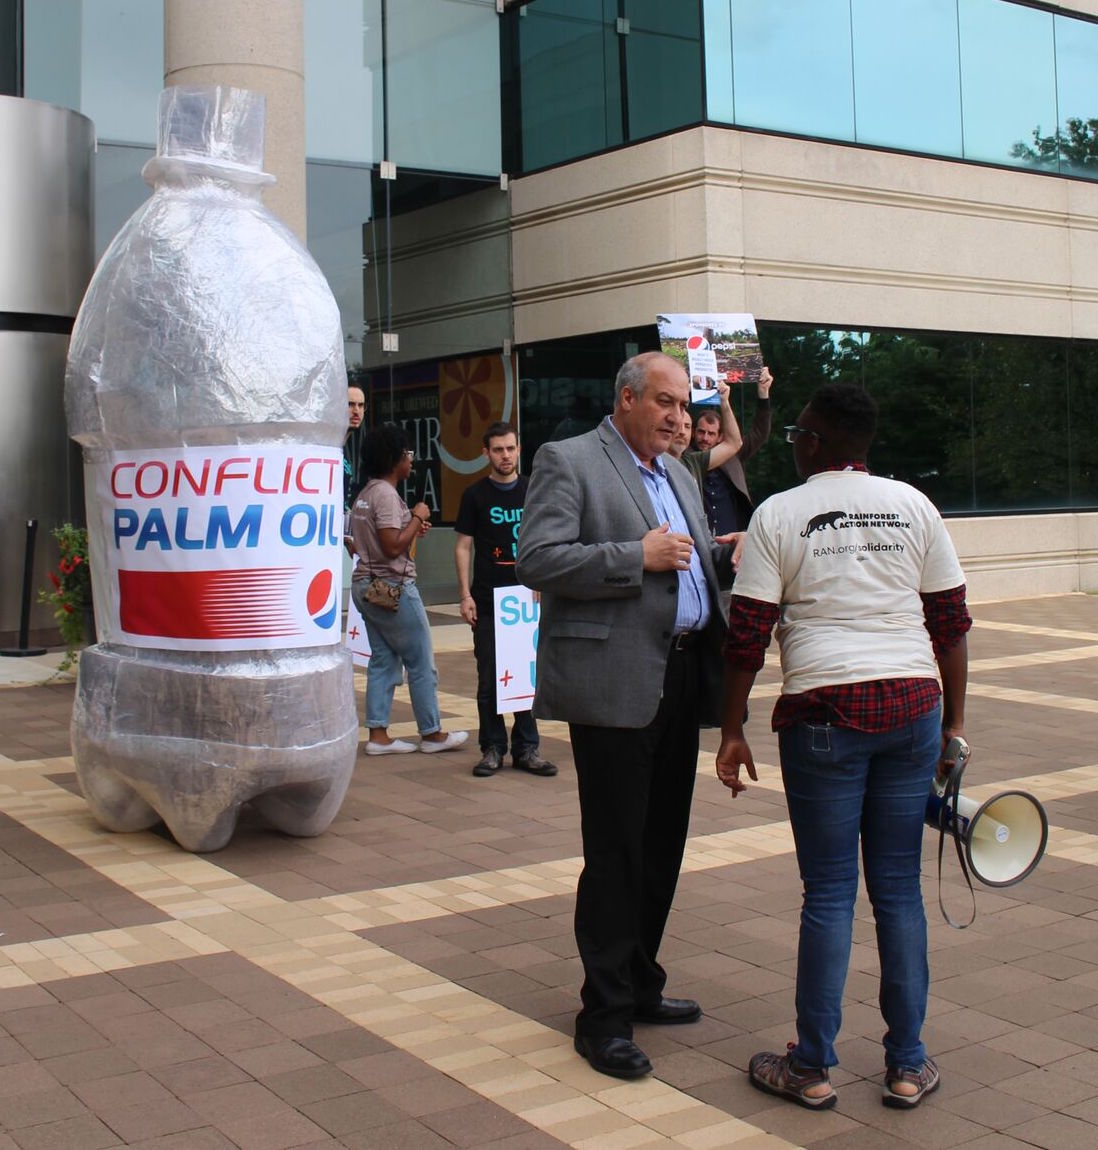 Pepsi accepting the #ConflictPalmOil bottle